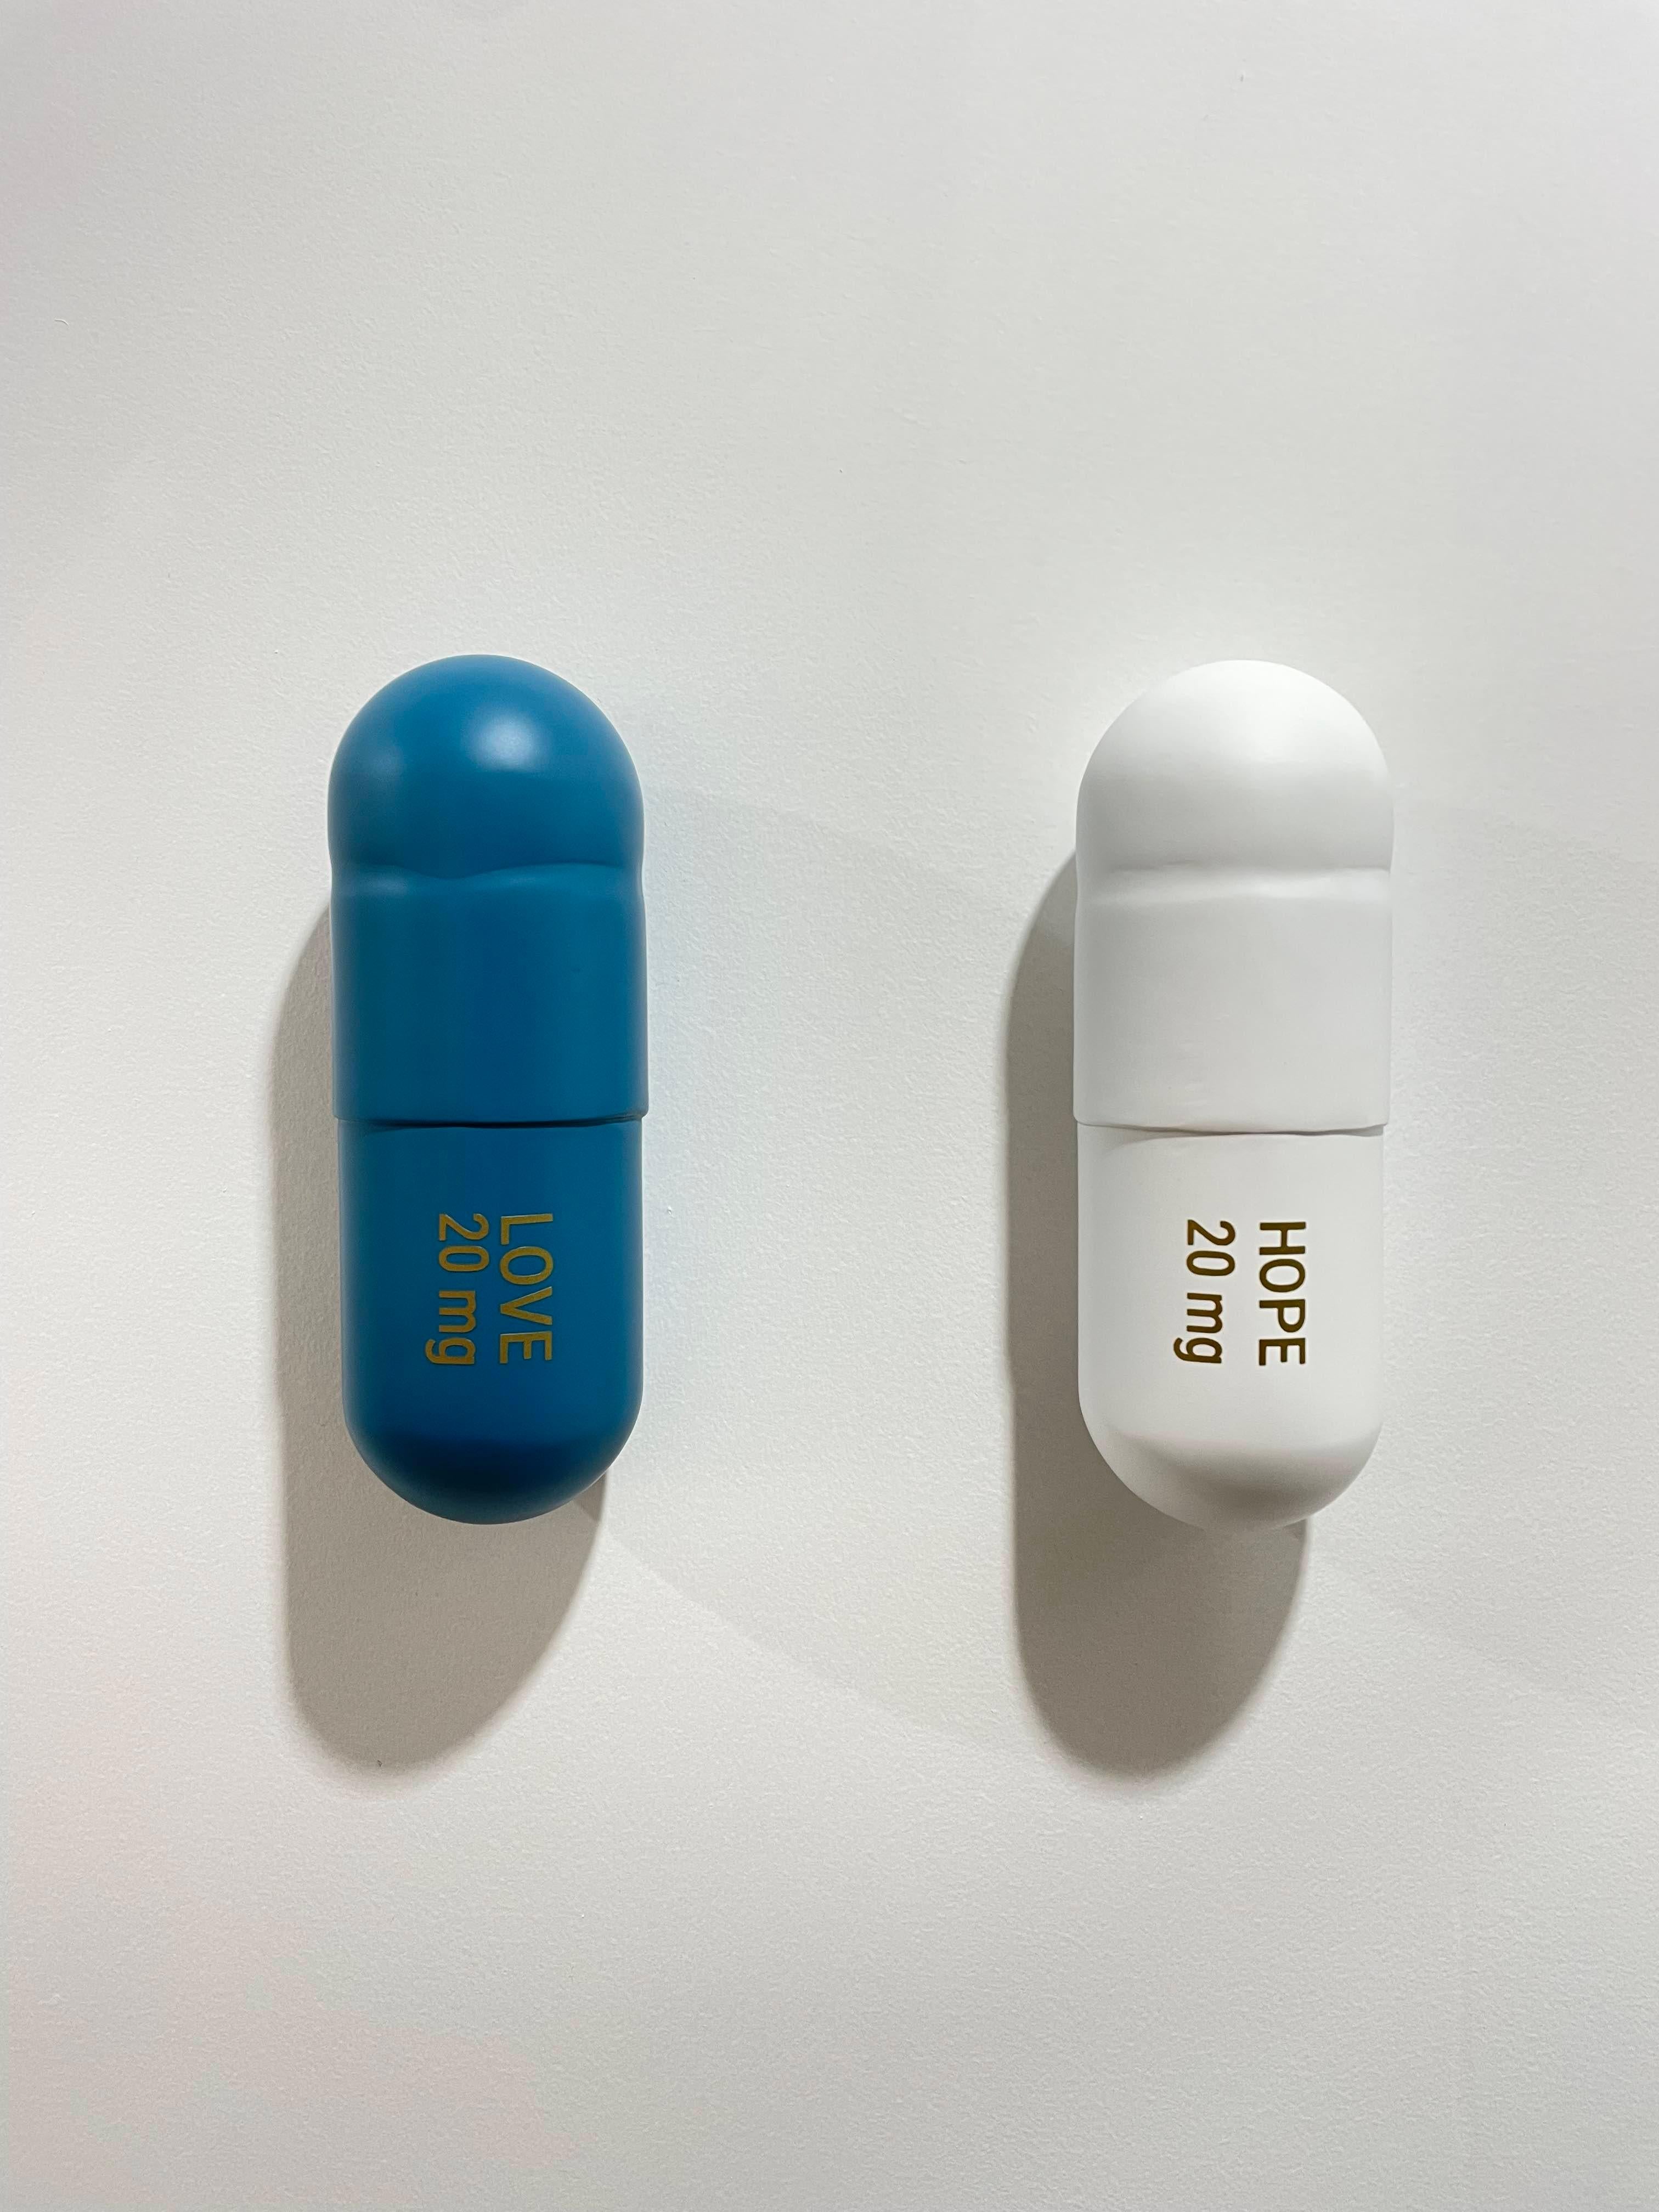 Tal Nehoray Still-Life Sculpture - 20 MG Love Hope matte pill Combo (turquoise, white) - figurative sculpture